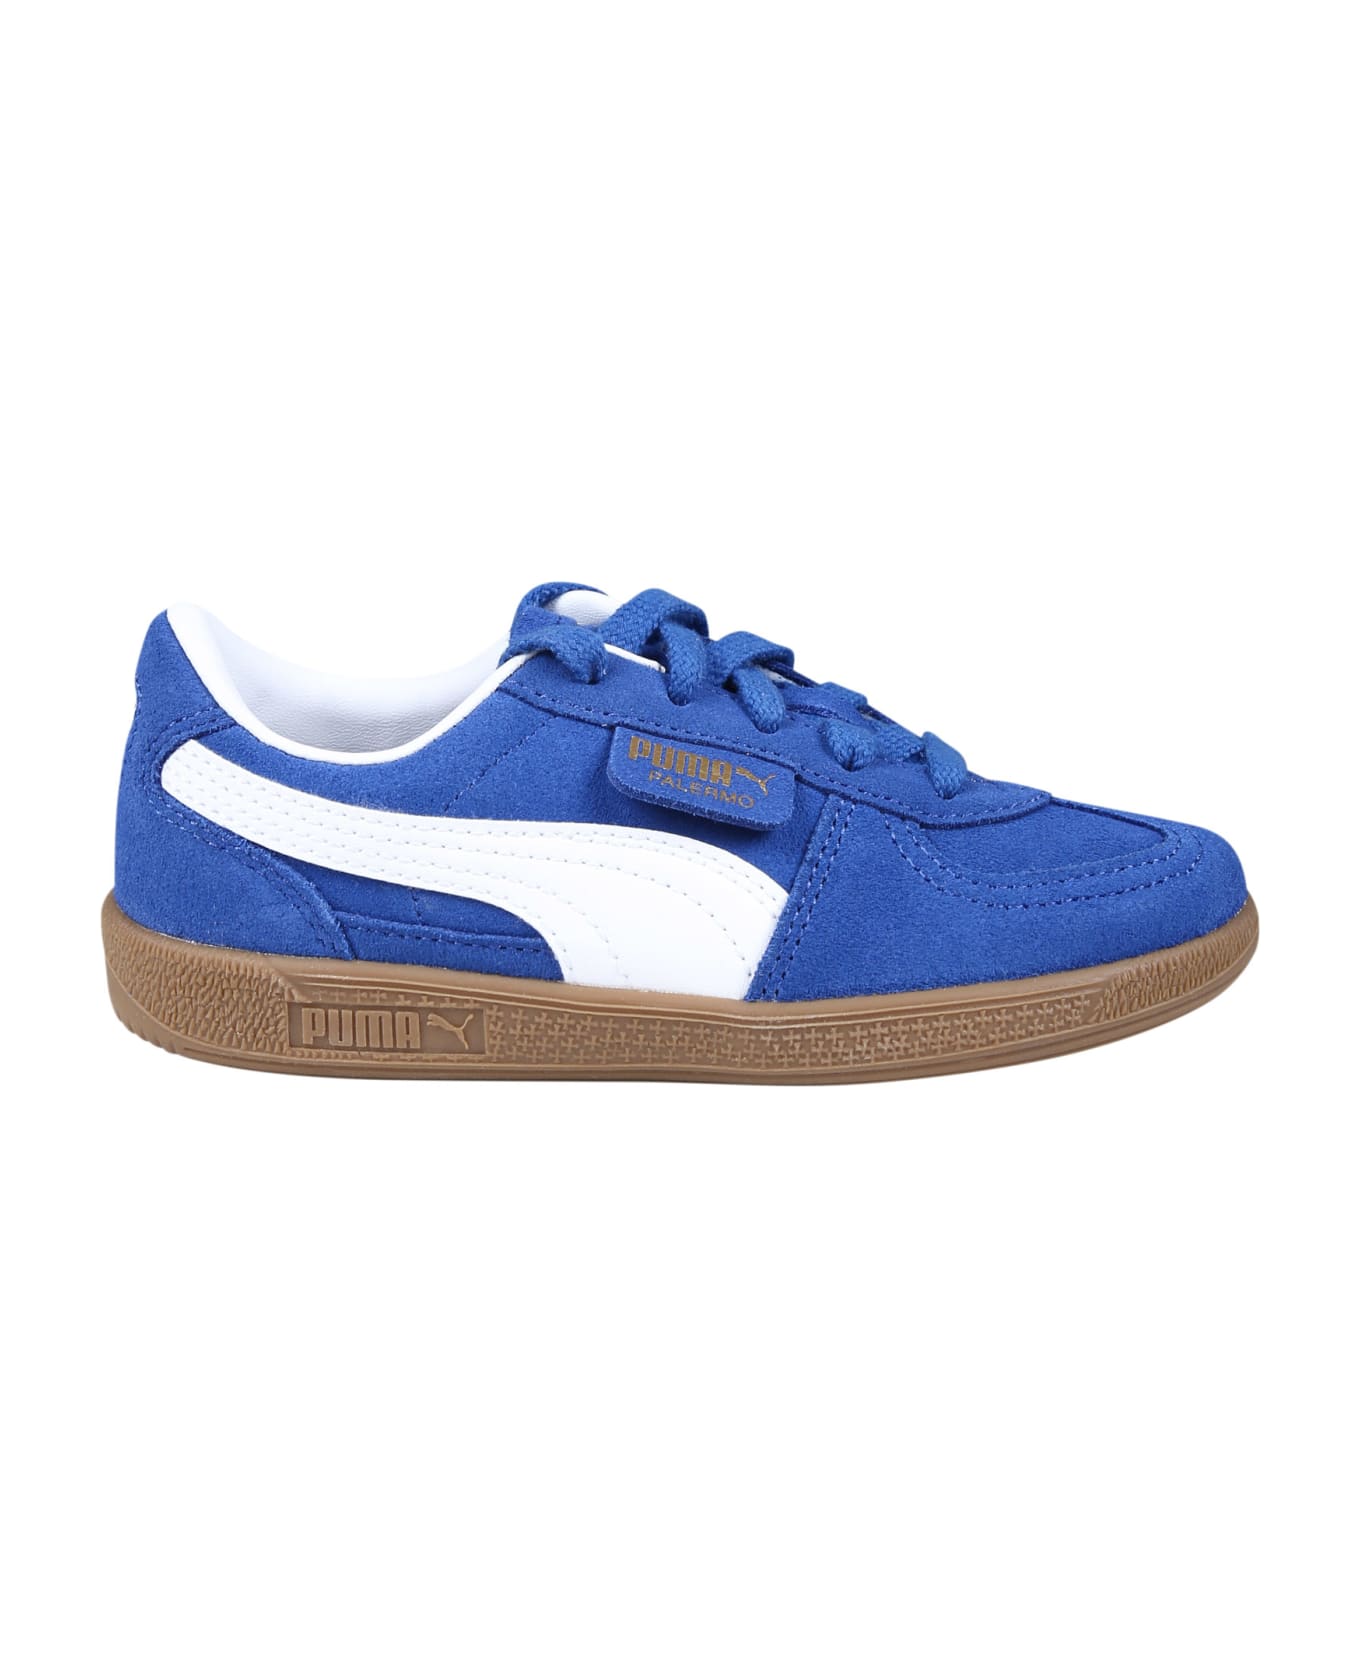 Puma Palermo Ps Light Blue Low Sneakers For Kids - Light Blue シューズ